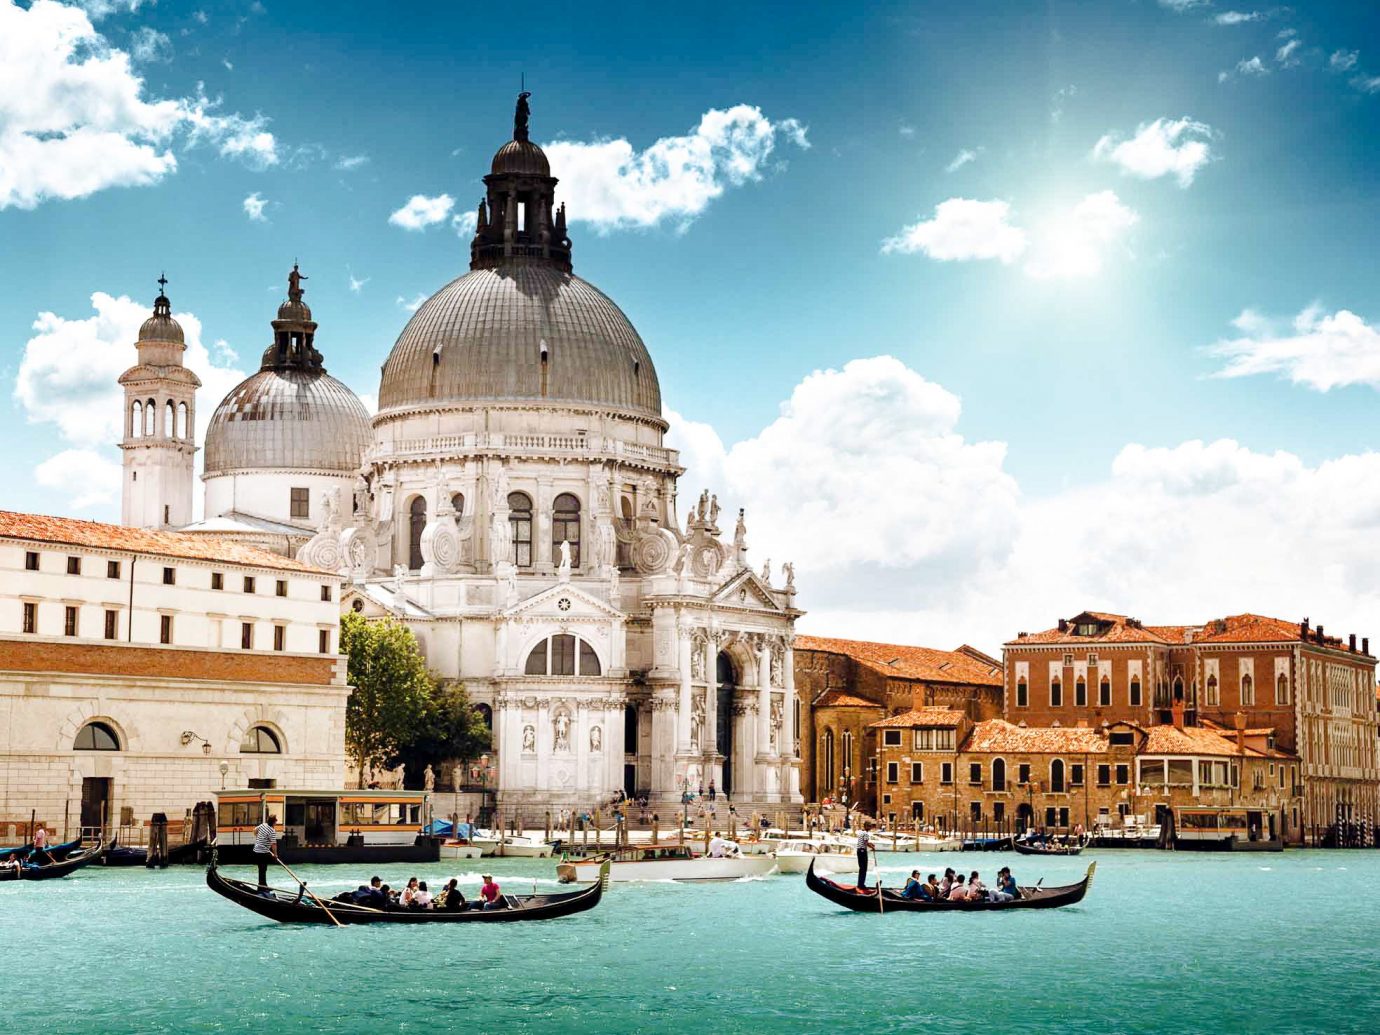 Cruise Travel Luxury Travel sky outdoor water Boat waterway landmark tourist attraction tourism City basilica gondola building facade historic site palace